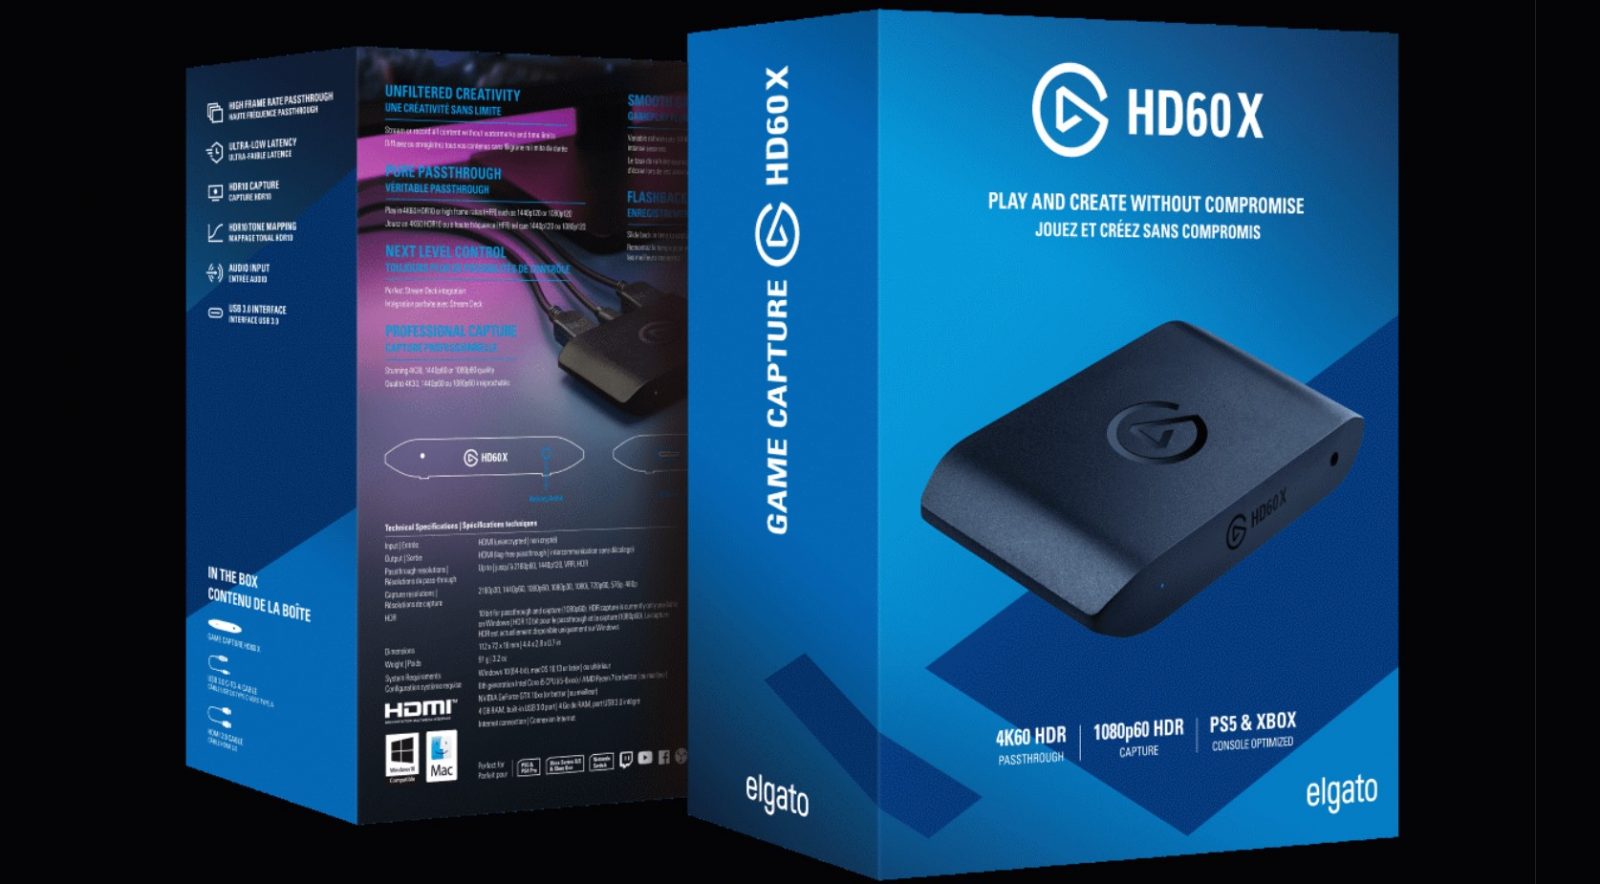 Elgato HD60 X - Stream and record in 1080p60 HDR10 or 4K30 with ultra-low  latency on PS5, PS4/Pro, Xbox Series X/S, Xbox One X/S, in OBS and more